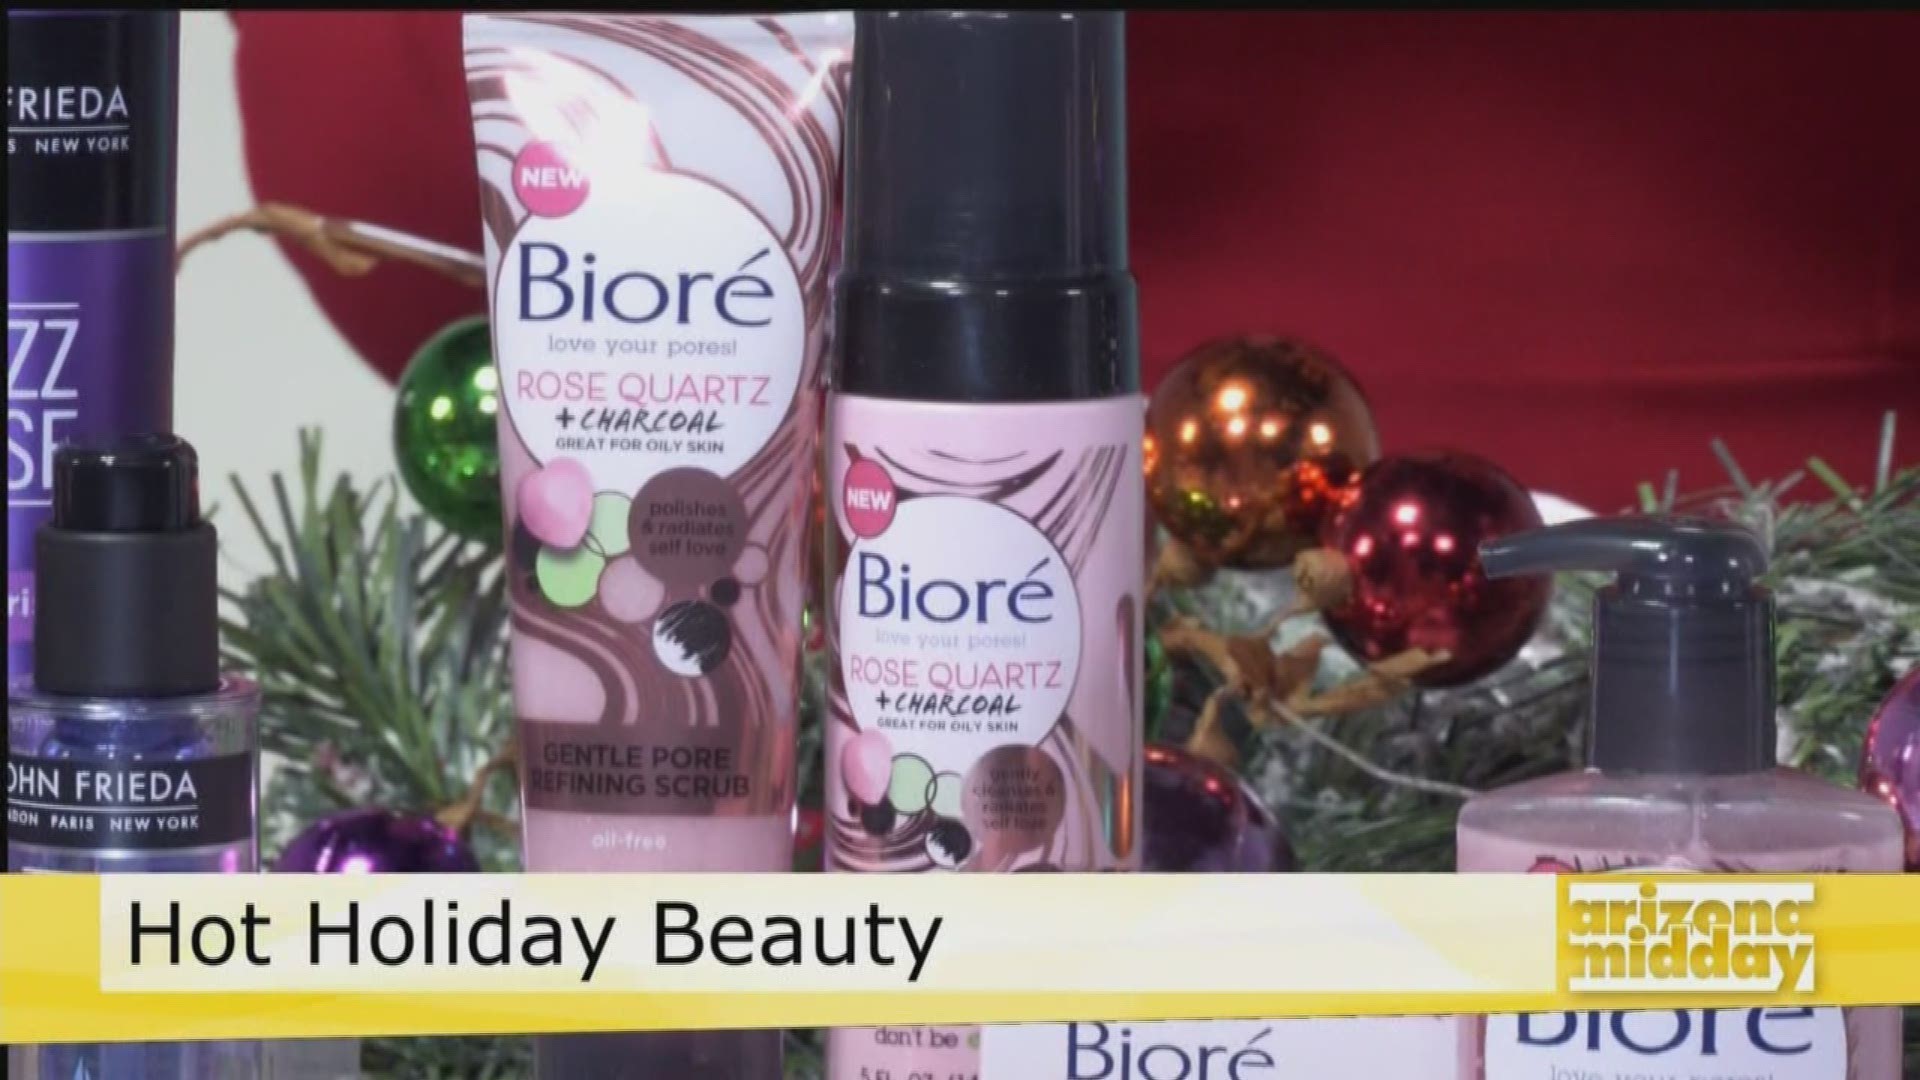 Beauty expert Milly Almodovar tells us how we can glam up our holiday gifts with moisturizers, hair products and more!